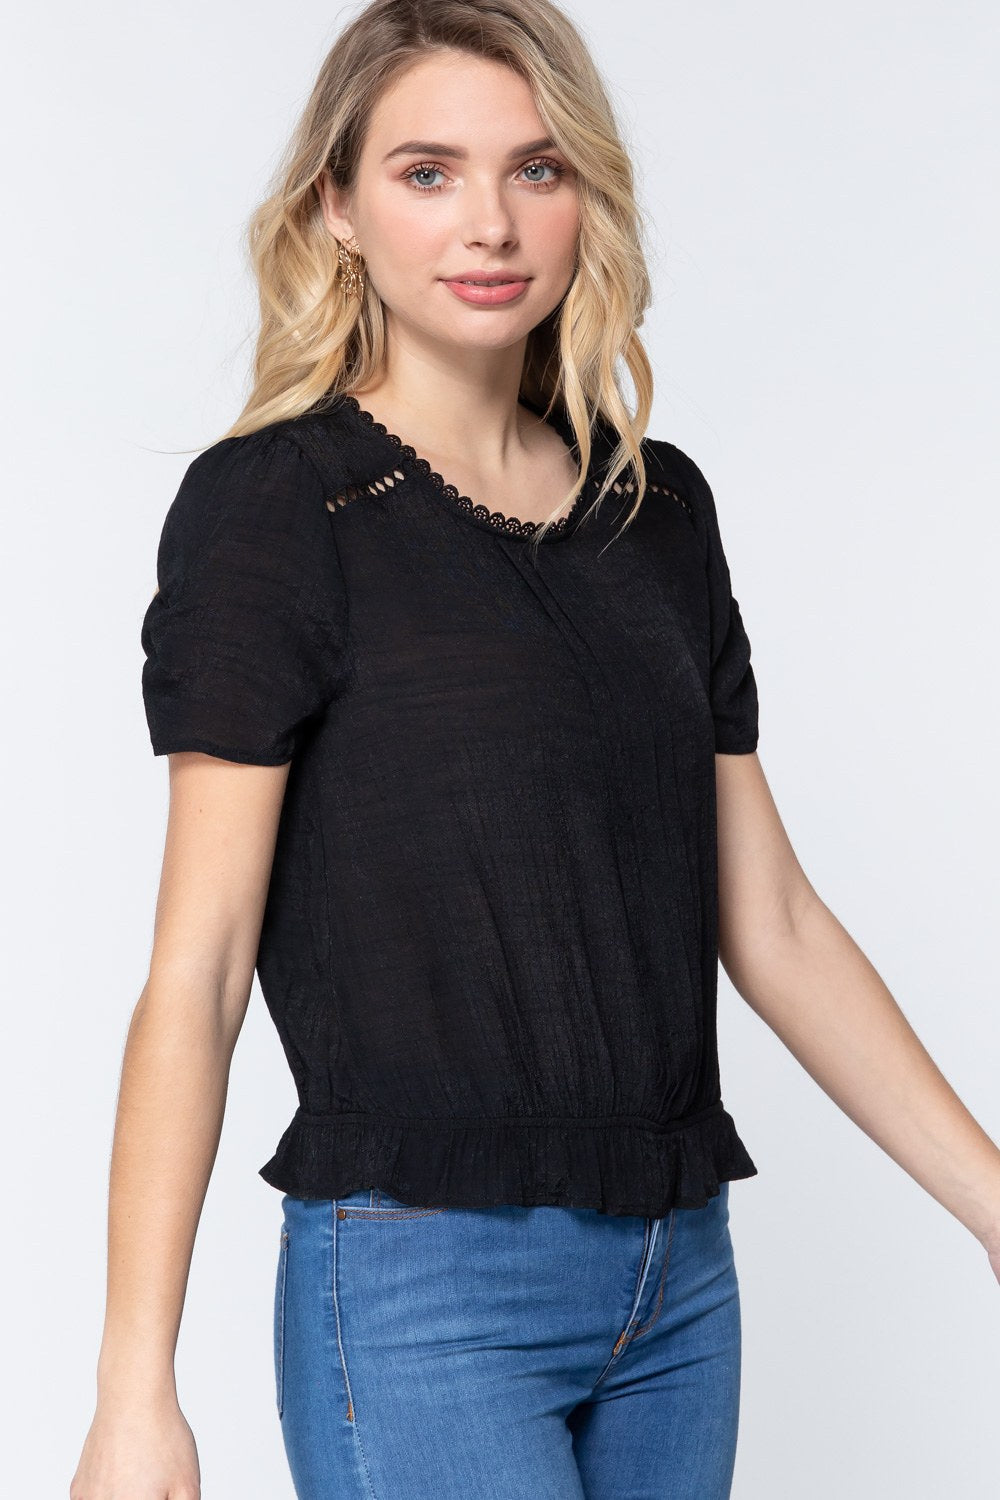 Short Shirring Slv Pleated Woven Top - LOLA LUXE